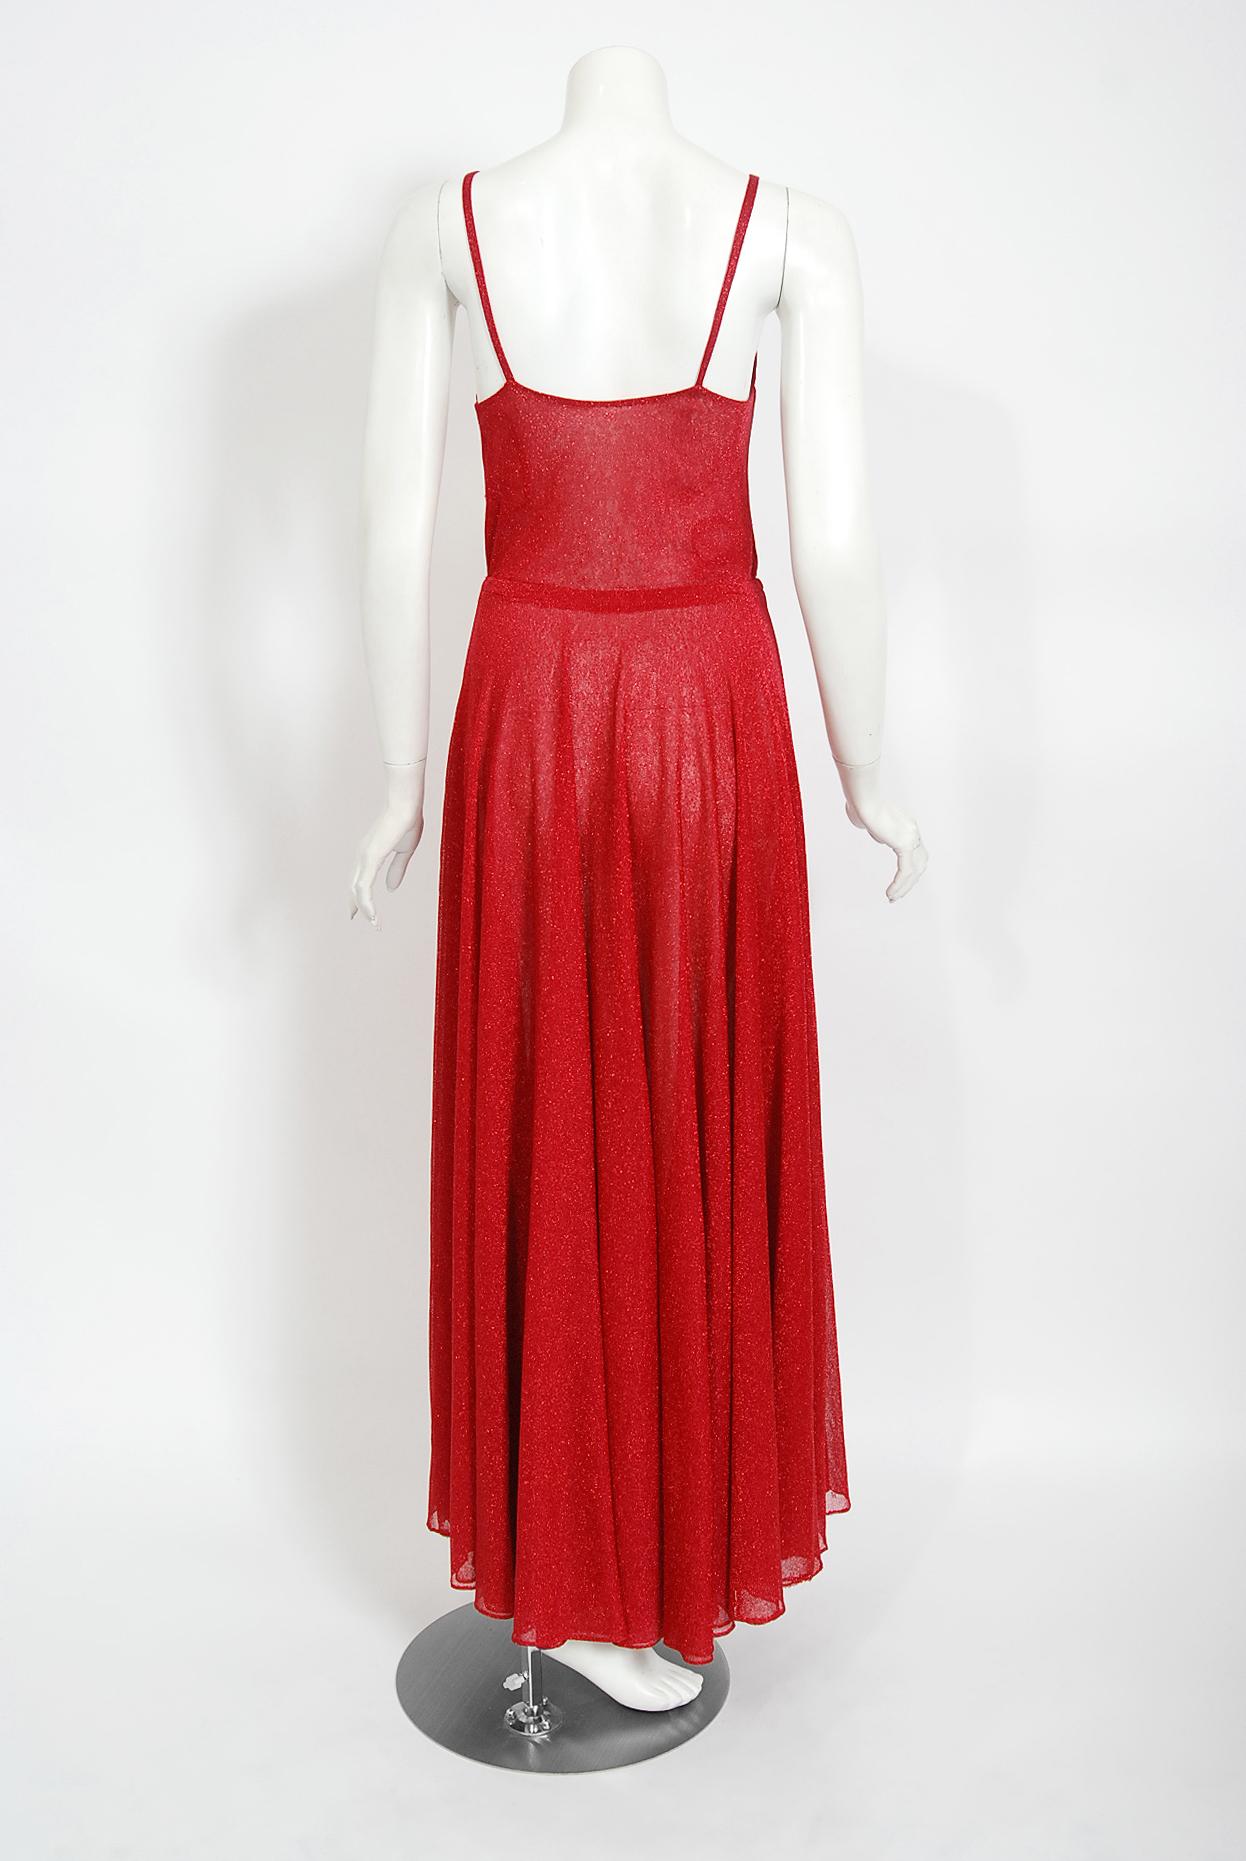 1970's Halston Couture Metallic Red Sheer Lurex Knit Long-Sleeve Maxi Dress Gown For Sale 2